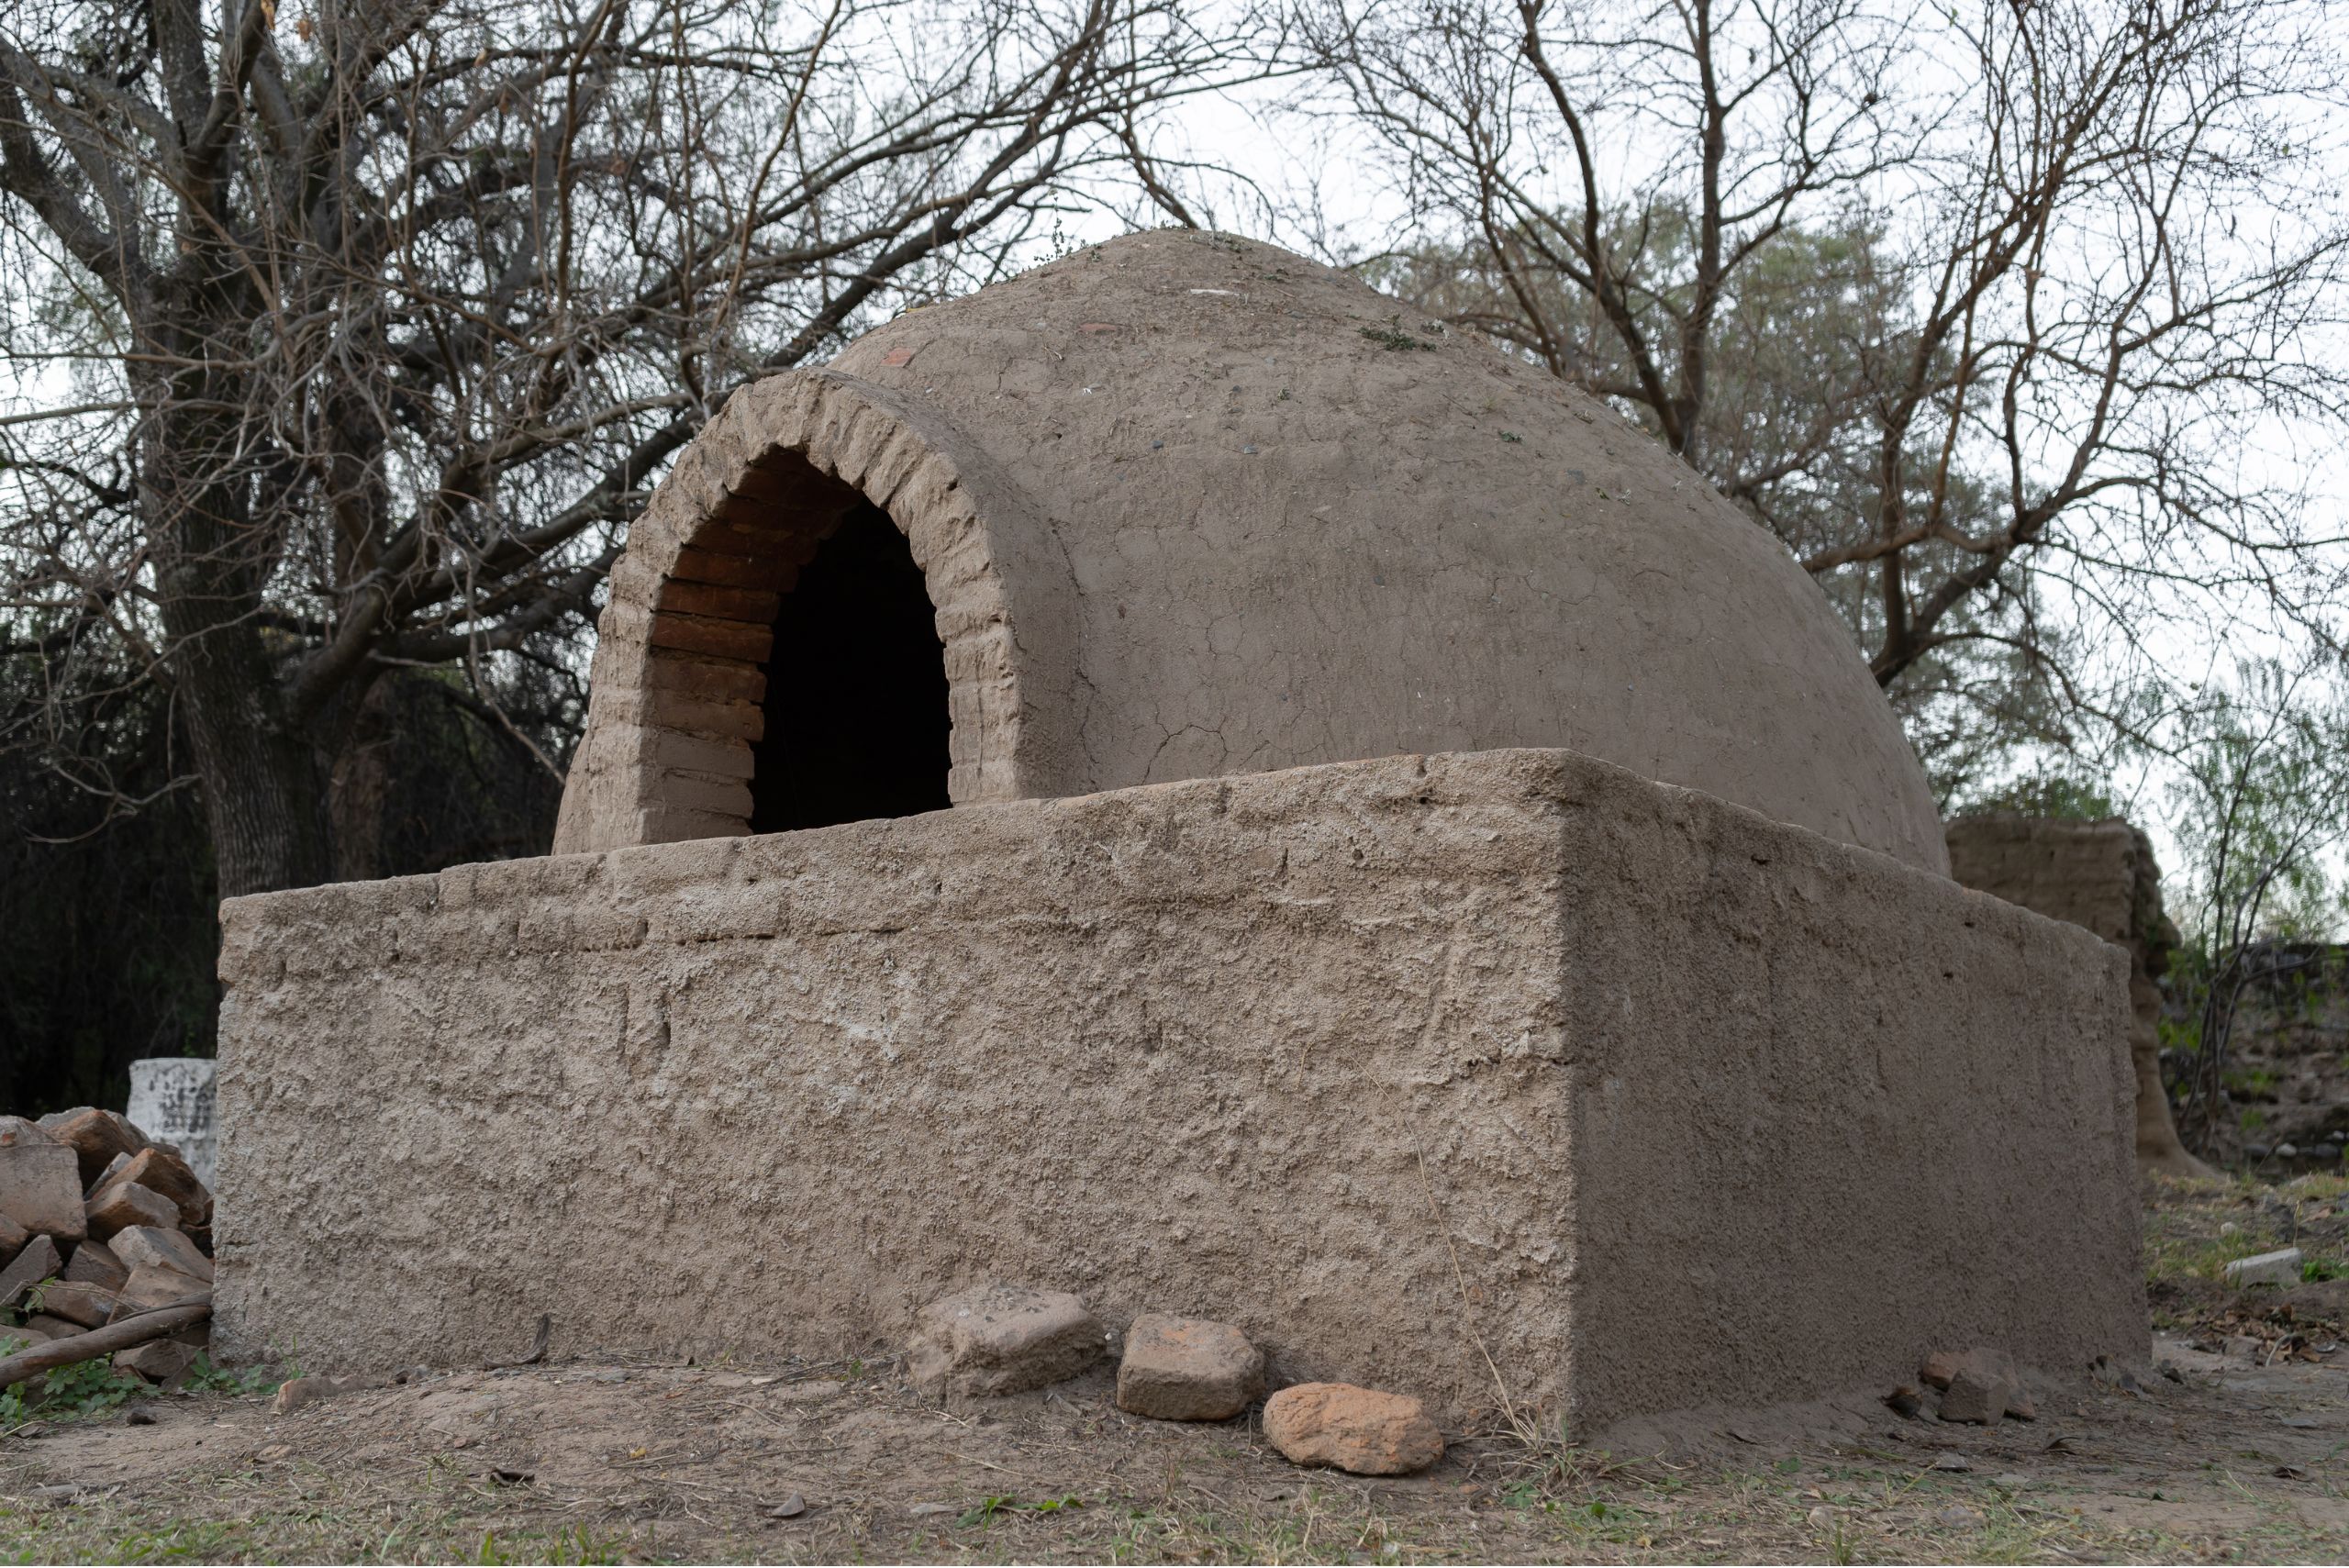 How Large Should a Pizza Oven Be in a Rural Setting